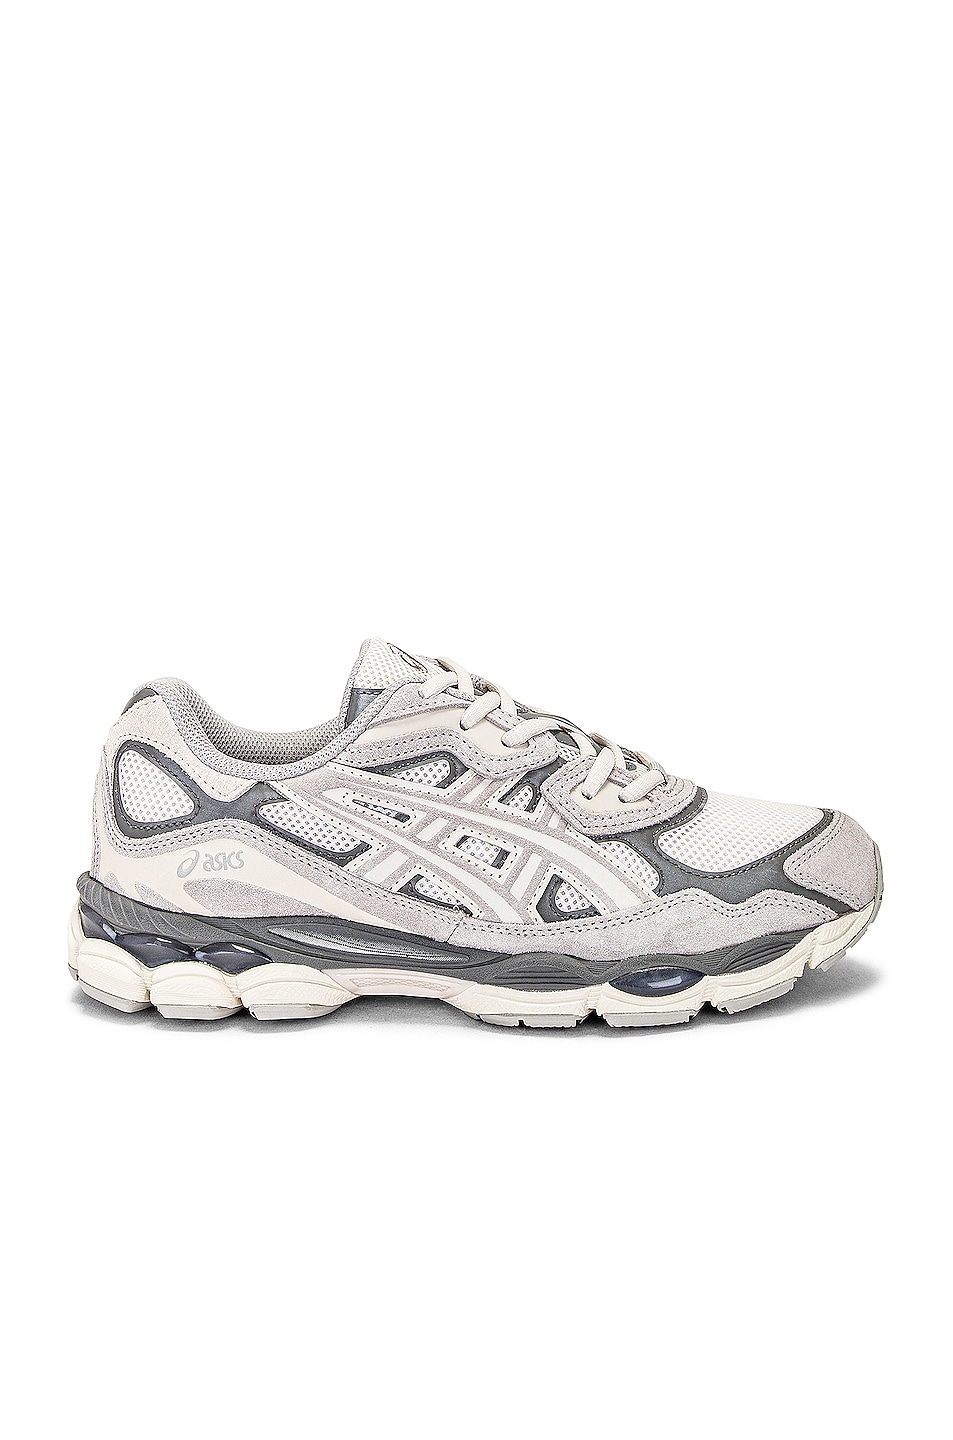 Image 1 of Asics Gel-nyc Sneaker in Cream & Oyster Grey